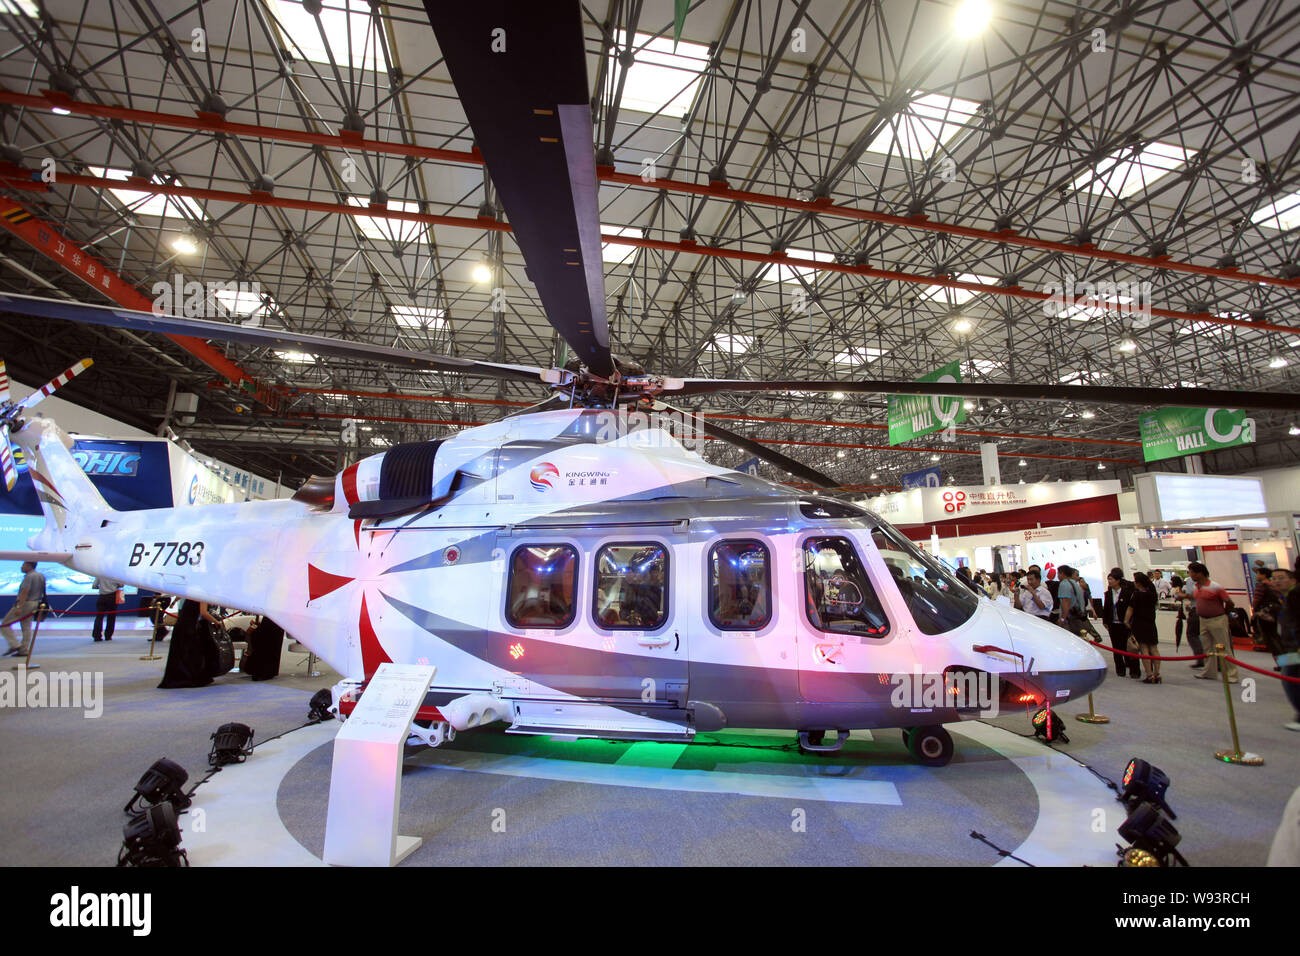 Visitors look at an AgustaWestland AW139 medium sized twin-engined helicopter at the 2nd China Helicopter Exposition in Tianjin, China, 5 September 20 Stock Photo